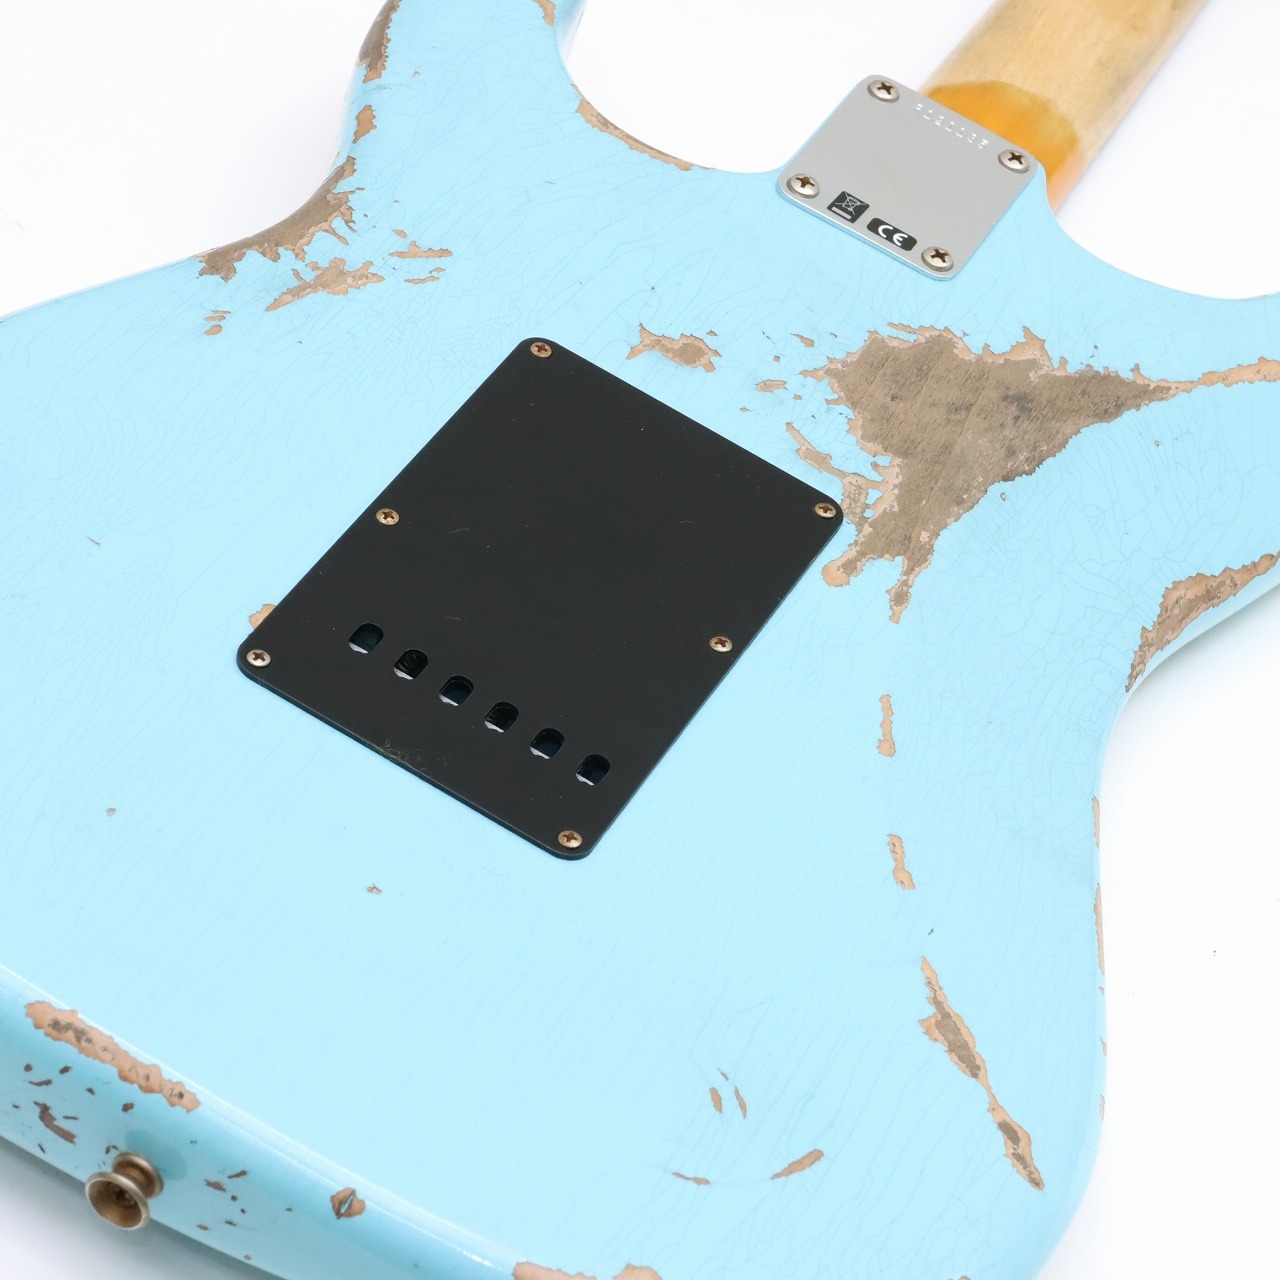 Fender Custom Shop Yamano Limited 1962 Stratocaster Heavy Relic Matching Headstock / Daphne Blue